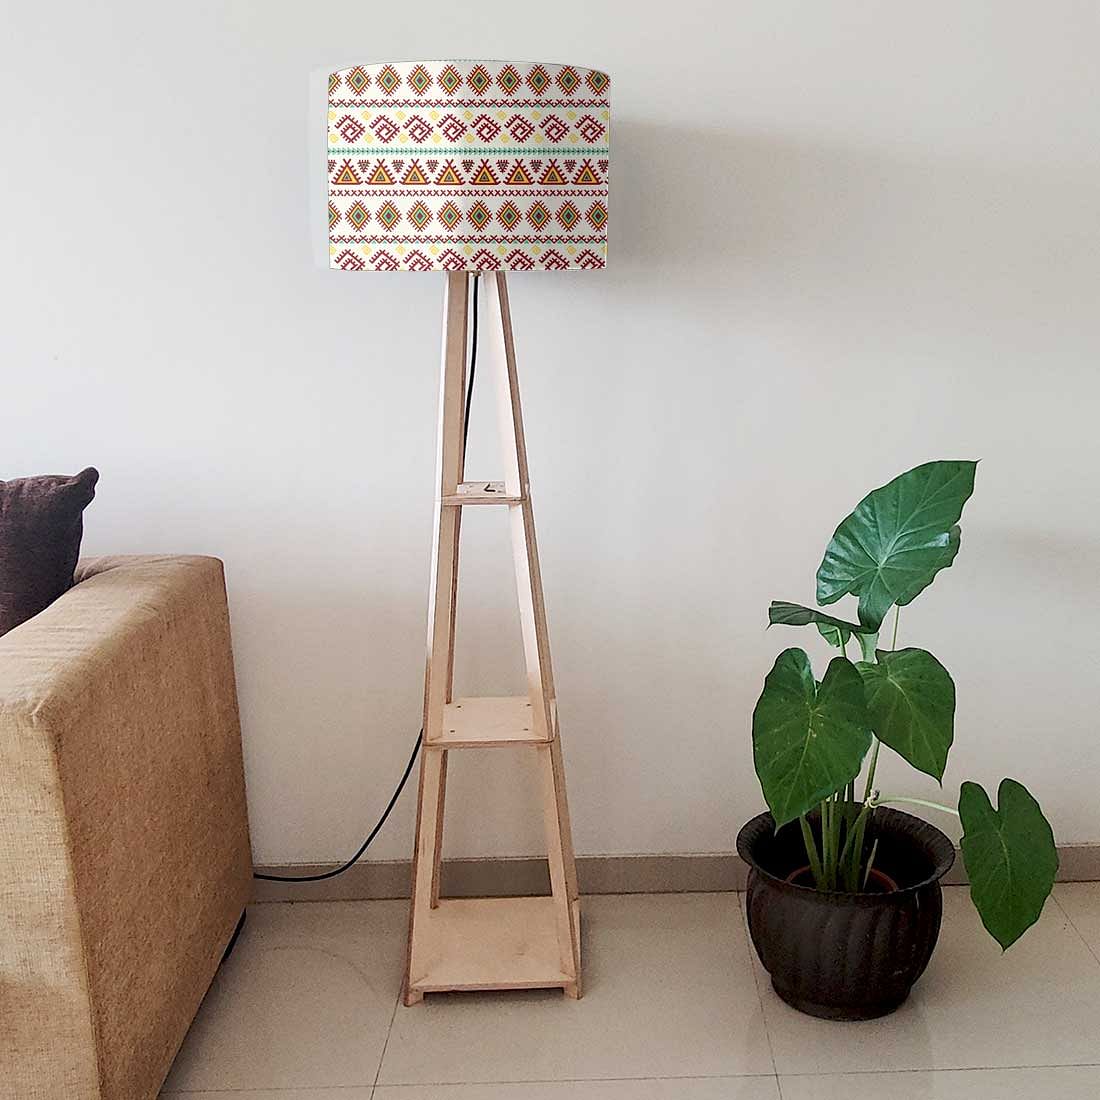 Floor Lamps For Living Room with Shelf - Aztec Pink Nutcase